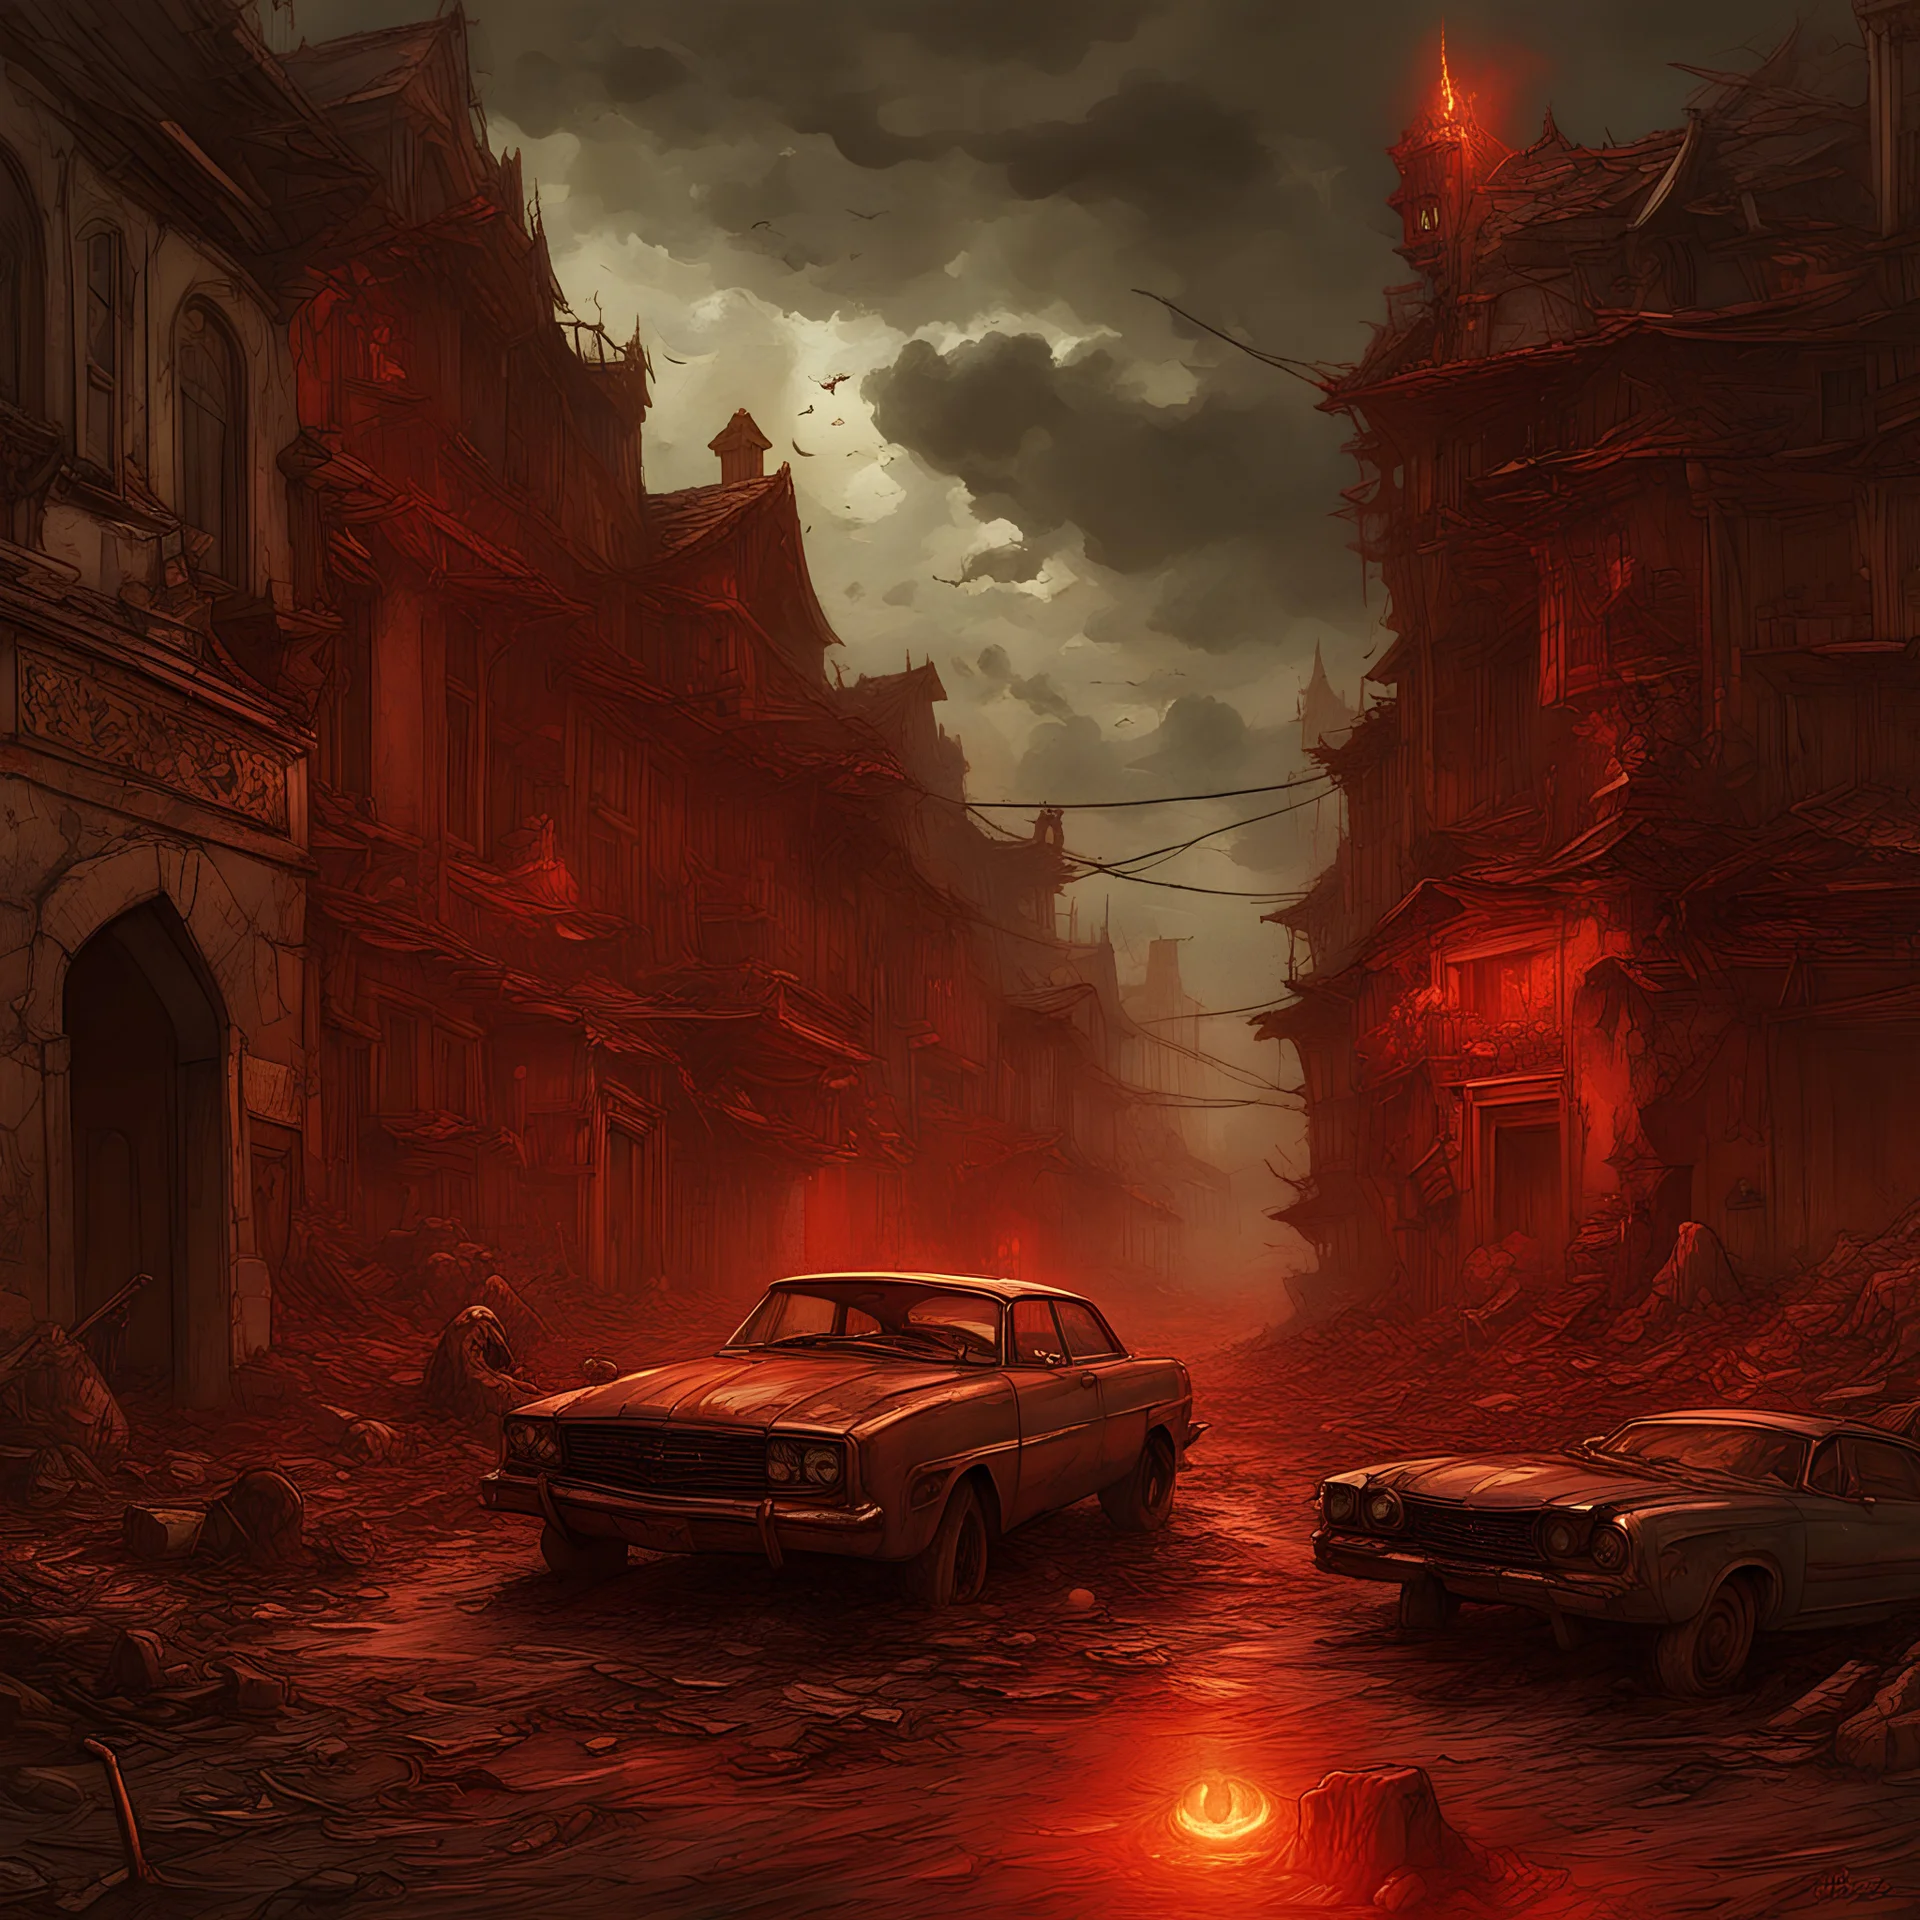 an elaborate painting of a 3dhd Apocalyptic Landmarks envaded medieval old town from outer space aliens with angled destroyed homes and roads, rustle old cars , stormy red blood night thunder lightning horror scary death everywhere concept art by Anato Finnstark, Alphonse Mucha, and Greg Rutkowski""Hyperrealistic, splash art, concept art, mid shot, intricately detailed, color depth, dramatic, 2/3 face angle, side light, colorful background"